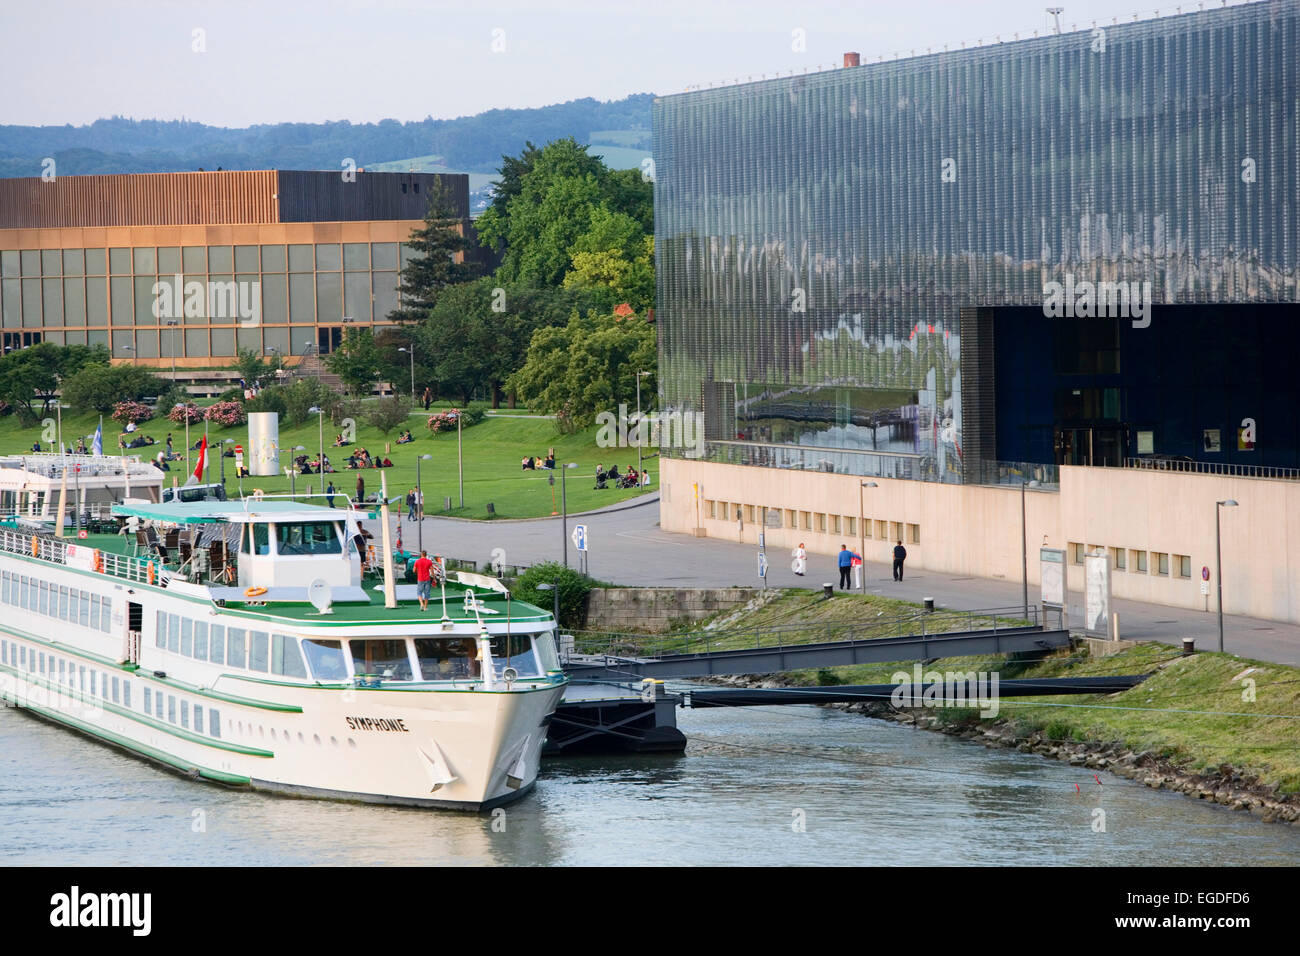 Cruise ship at a pier at the Lentos Art Museum for modern and contemporary art, with the Brucknerhaus concert hall in the background, Linz, Upper Austria, Austria Stock Photo